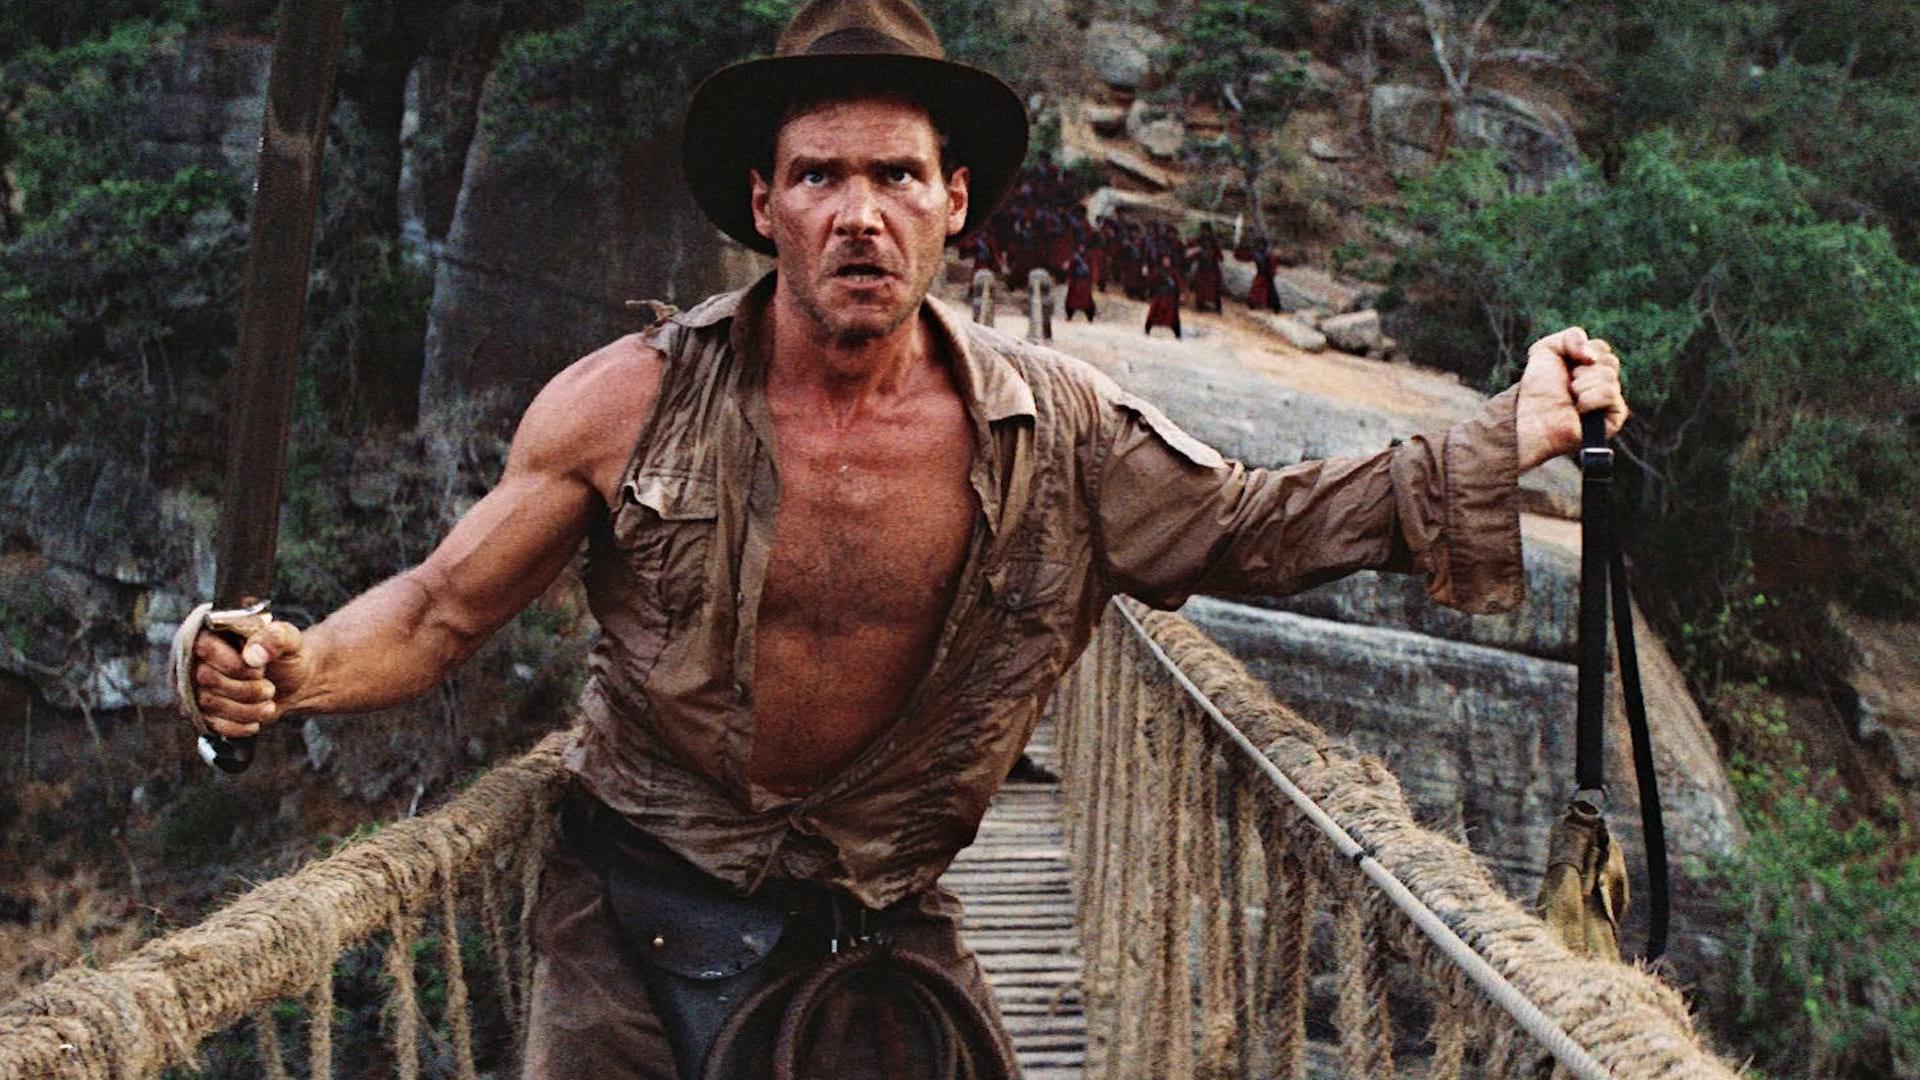 Steven Spielberg on Indiana Jones and the Temple of Doom - The American Society of Cinematographers (en-US)